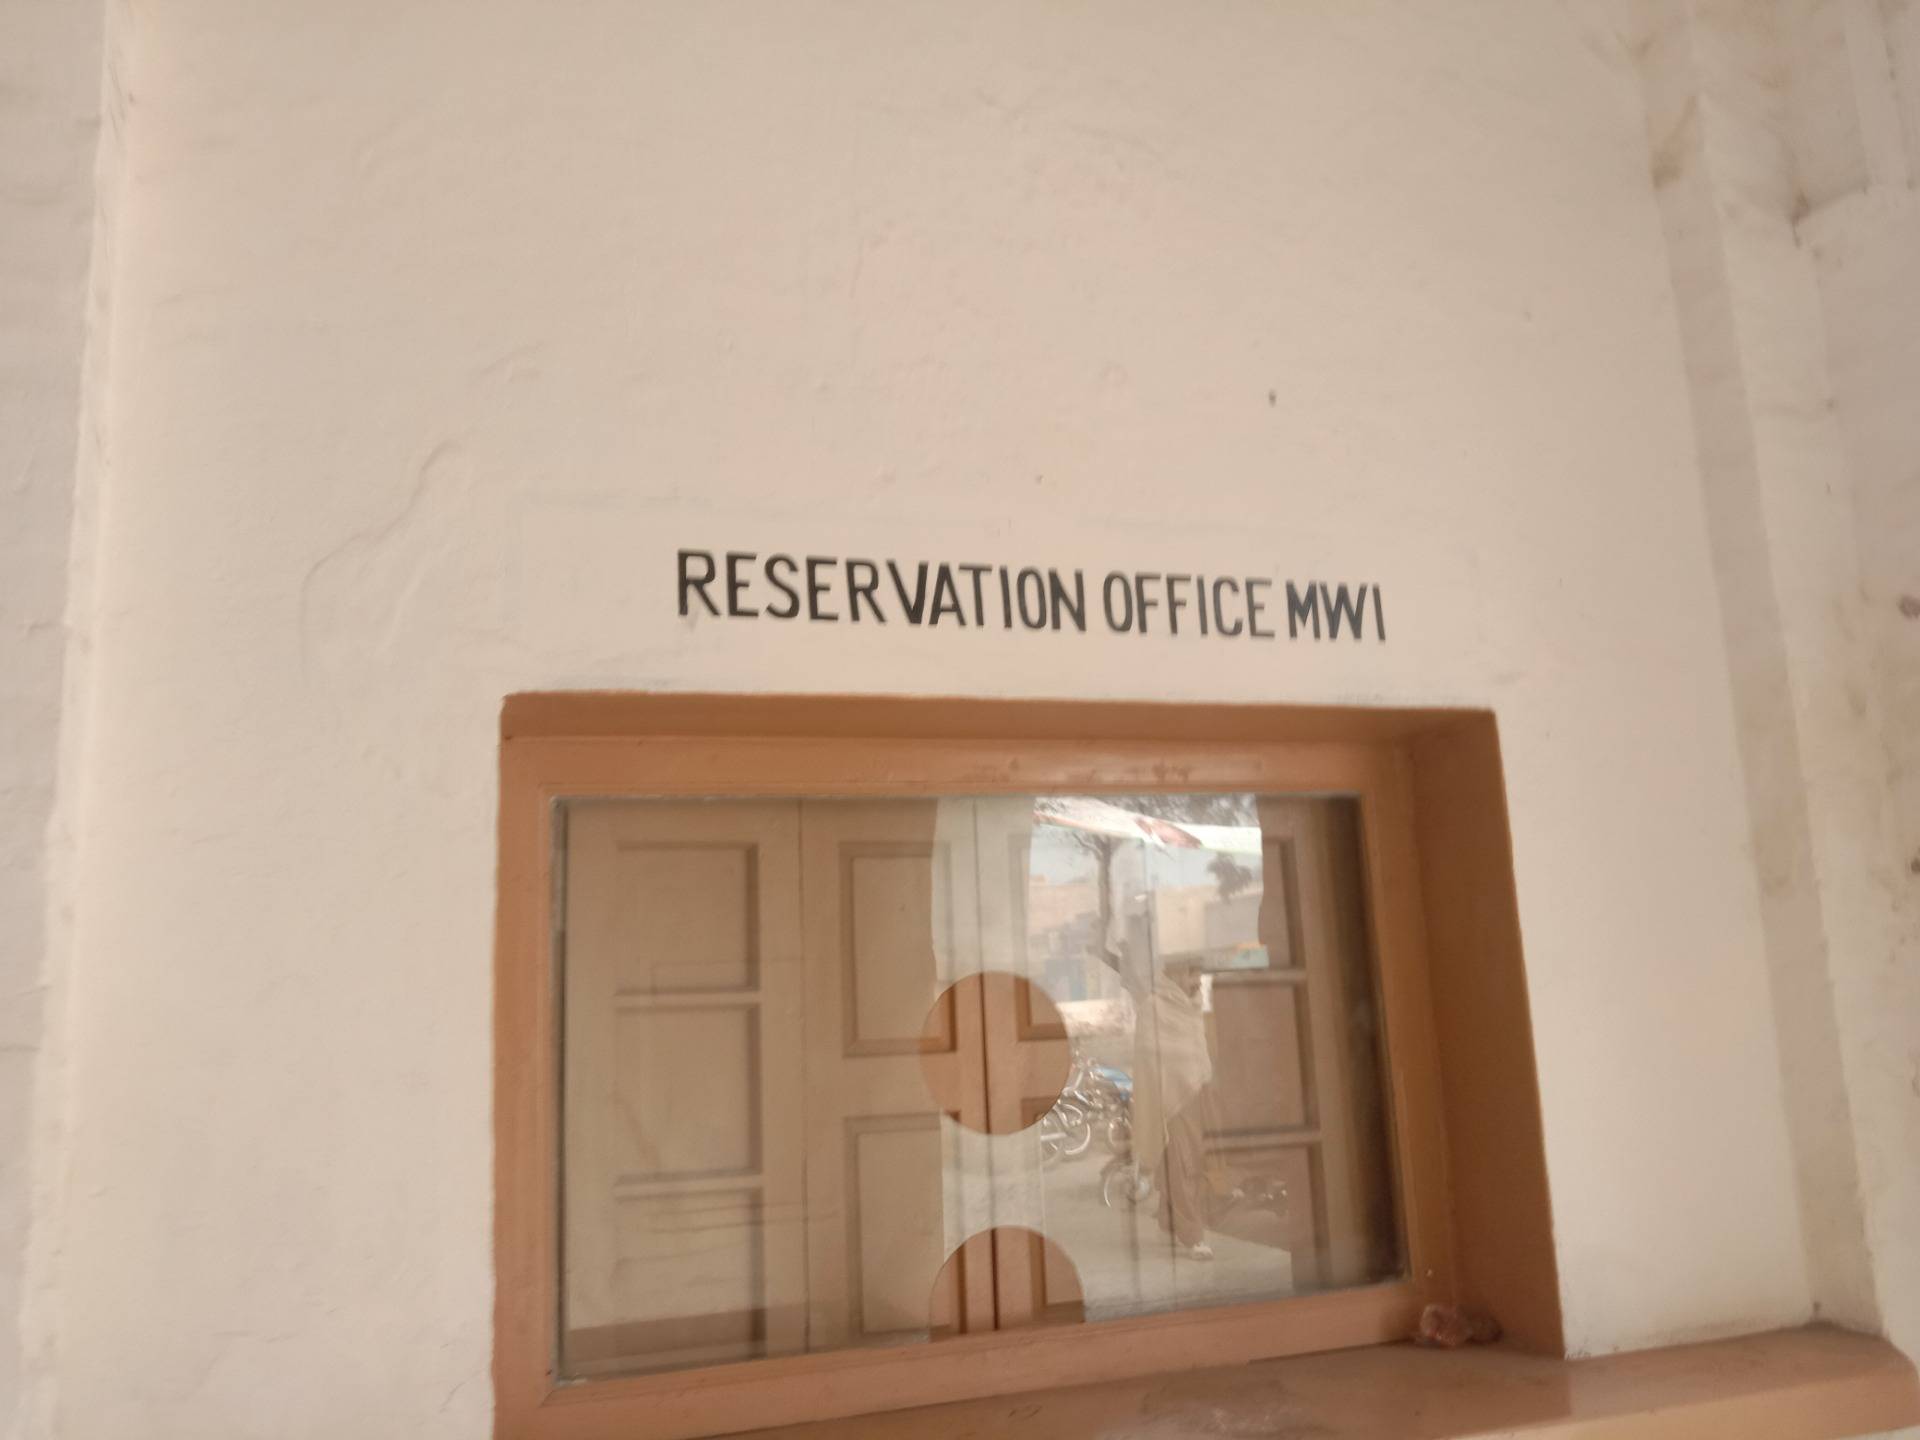 reservation office window